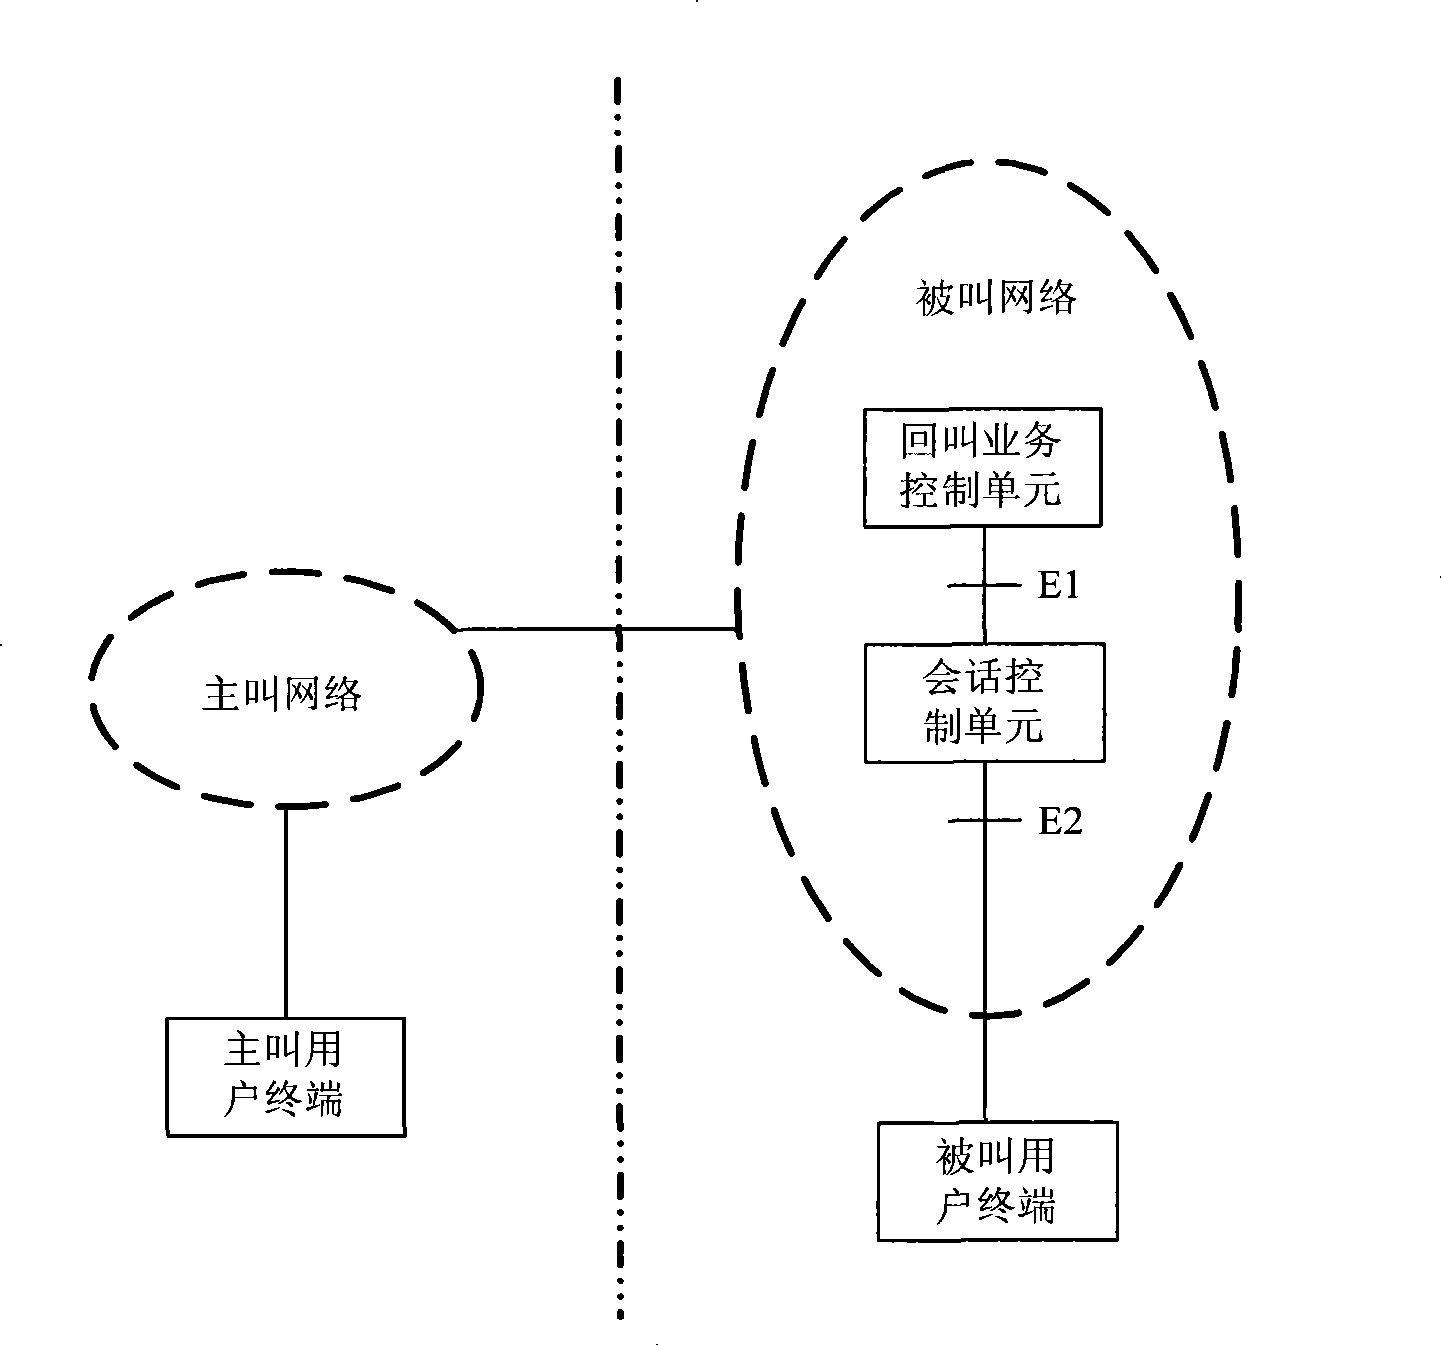 Method and apparatus realizing call-back service